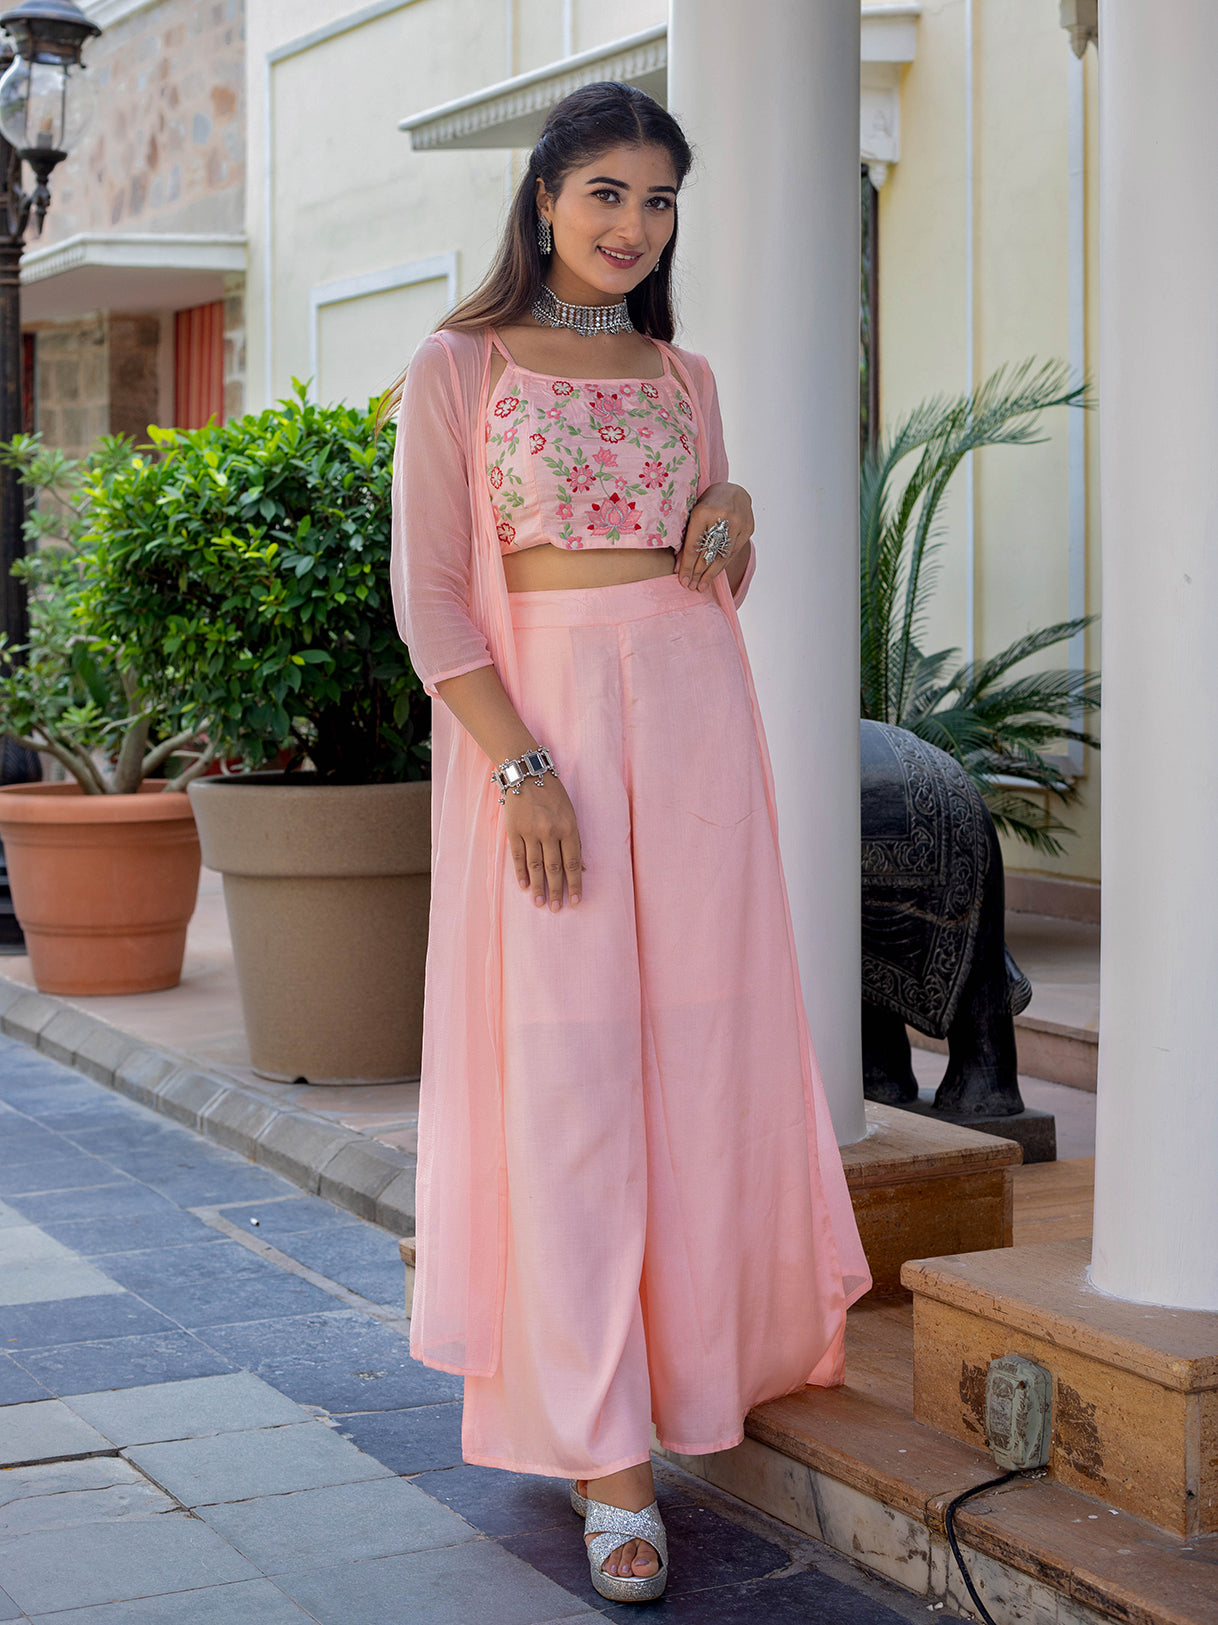 introducing-our-peach-pink-co-ord-set-featuring-vibrant-floral-embroidery-on-the-crop-top-embrace-the-beauty-of-colorful-blooms-in-this-chic-ensemble